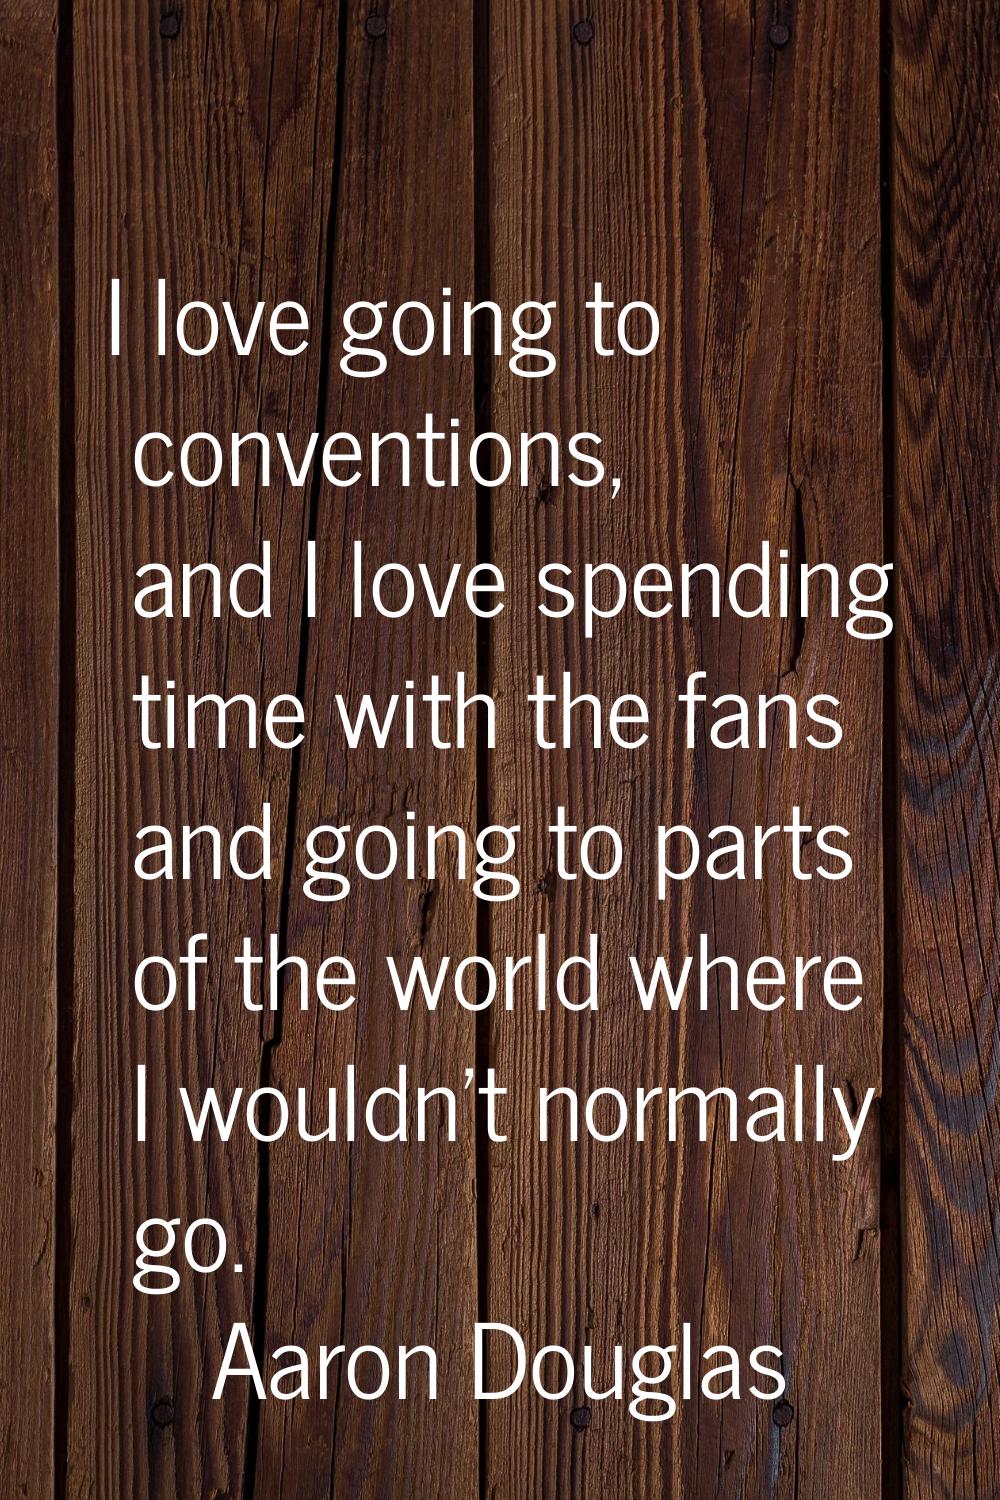 I love going to conventions, and I love spending time with the fans and going to parts of the world